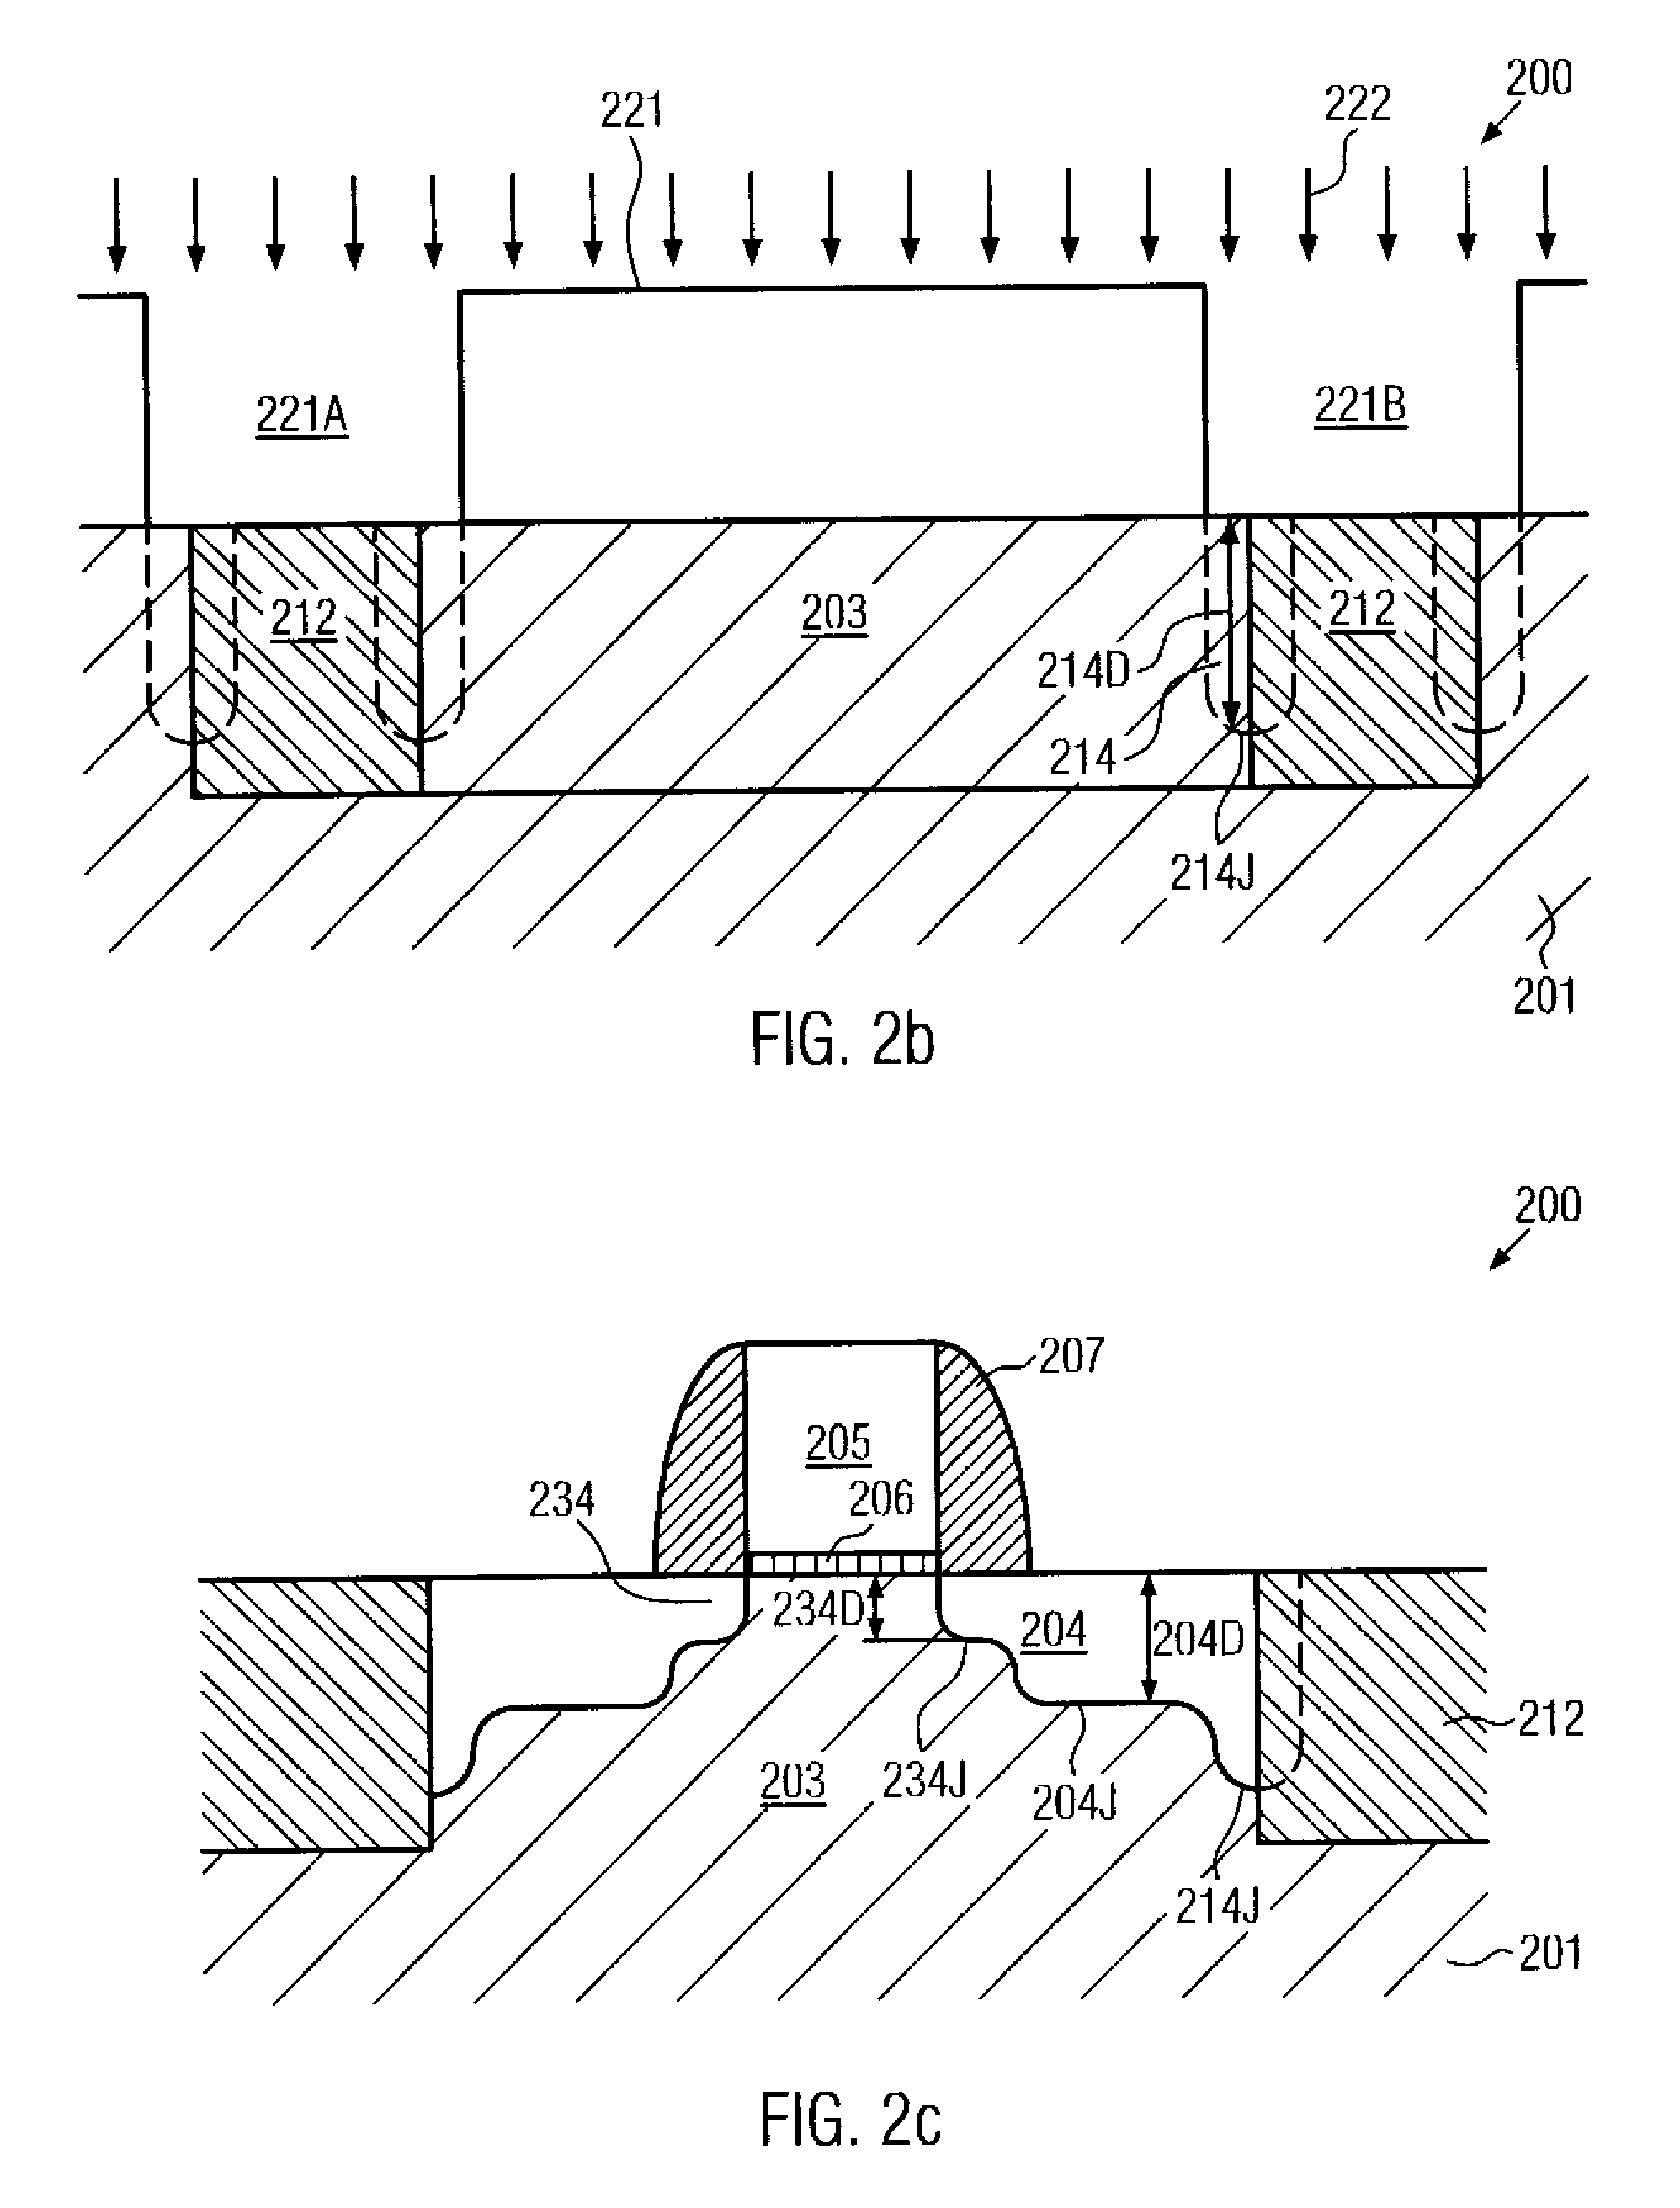 Method for reducing leakage currents caused by misalignment of a contact structure by increasing an error tolerance of the contact patterning process